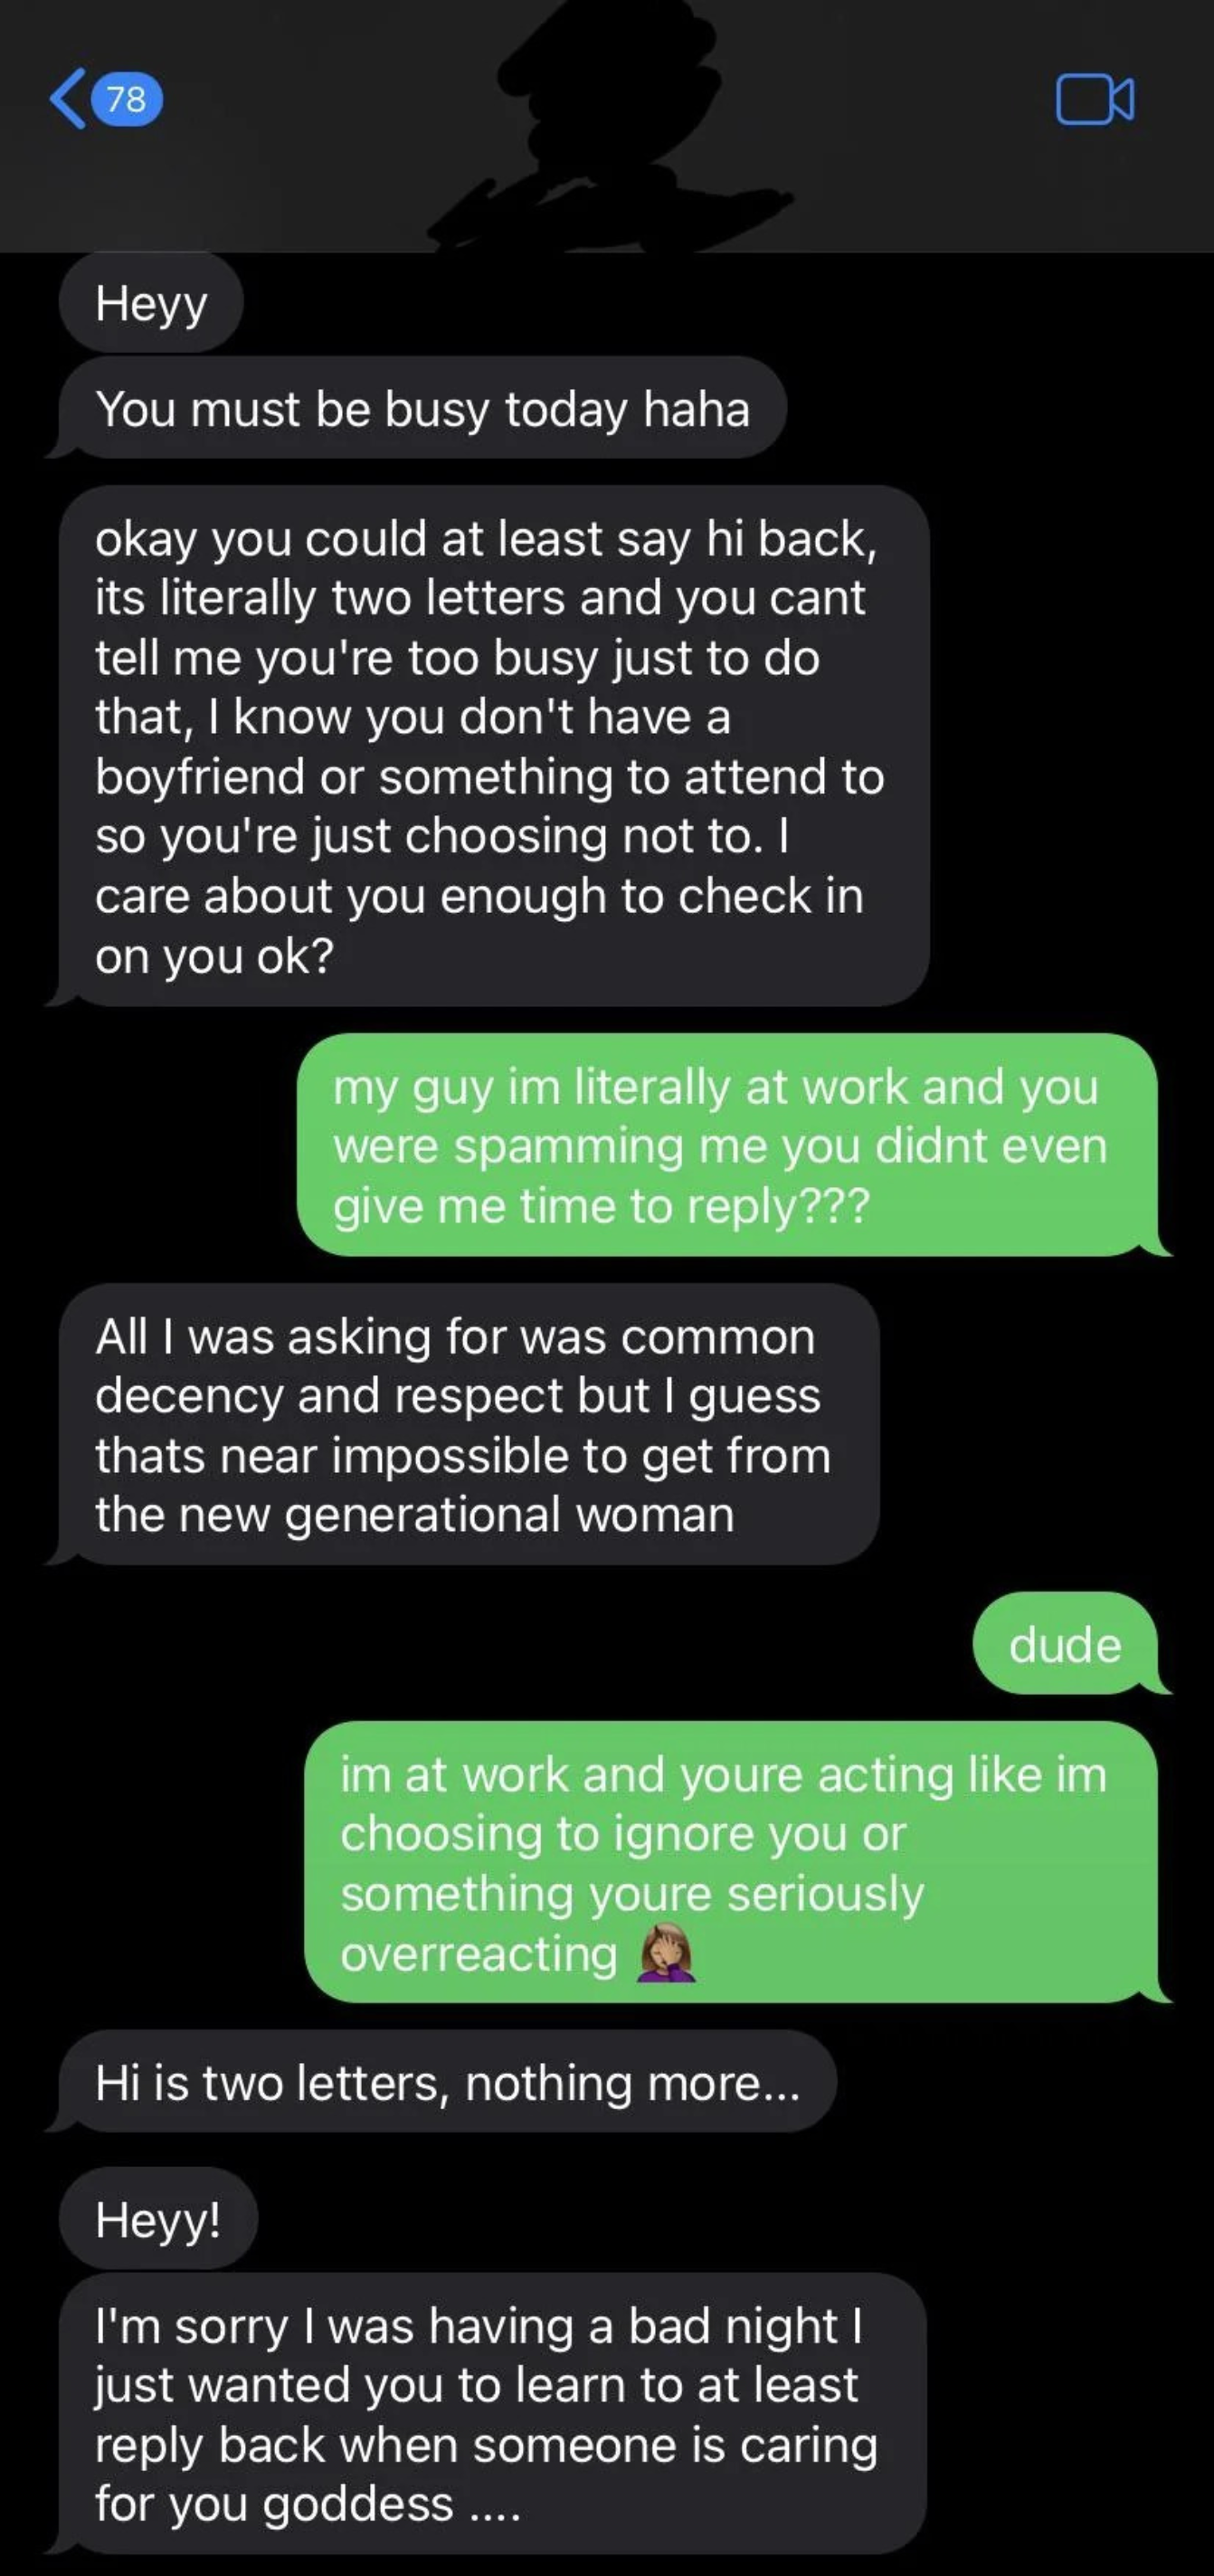 He&#x27;s just asking for common decency and scolding her for not at least responding with &quot;hi&quot; when she&#x27;s at work, since he knows she &quot;doesn&#x27;t have a boyfriend or anything to attend to&quot;